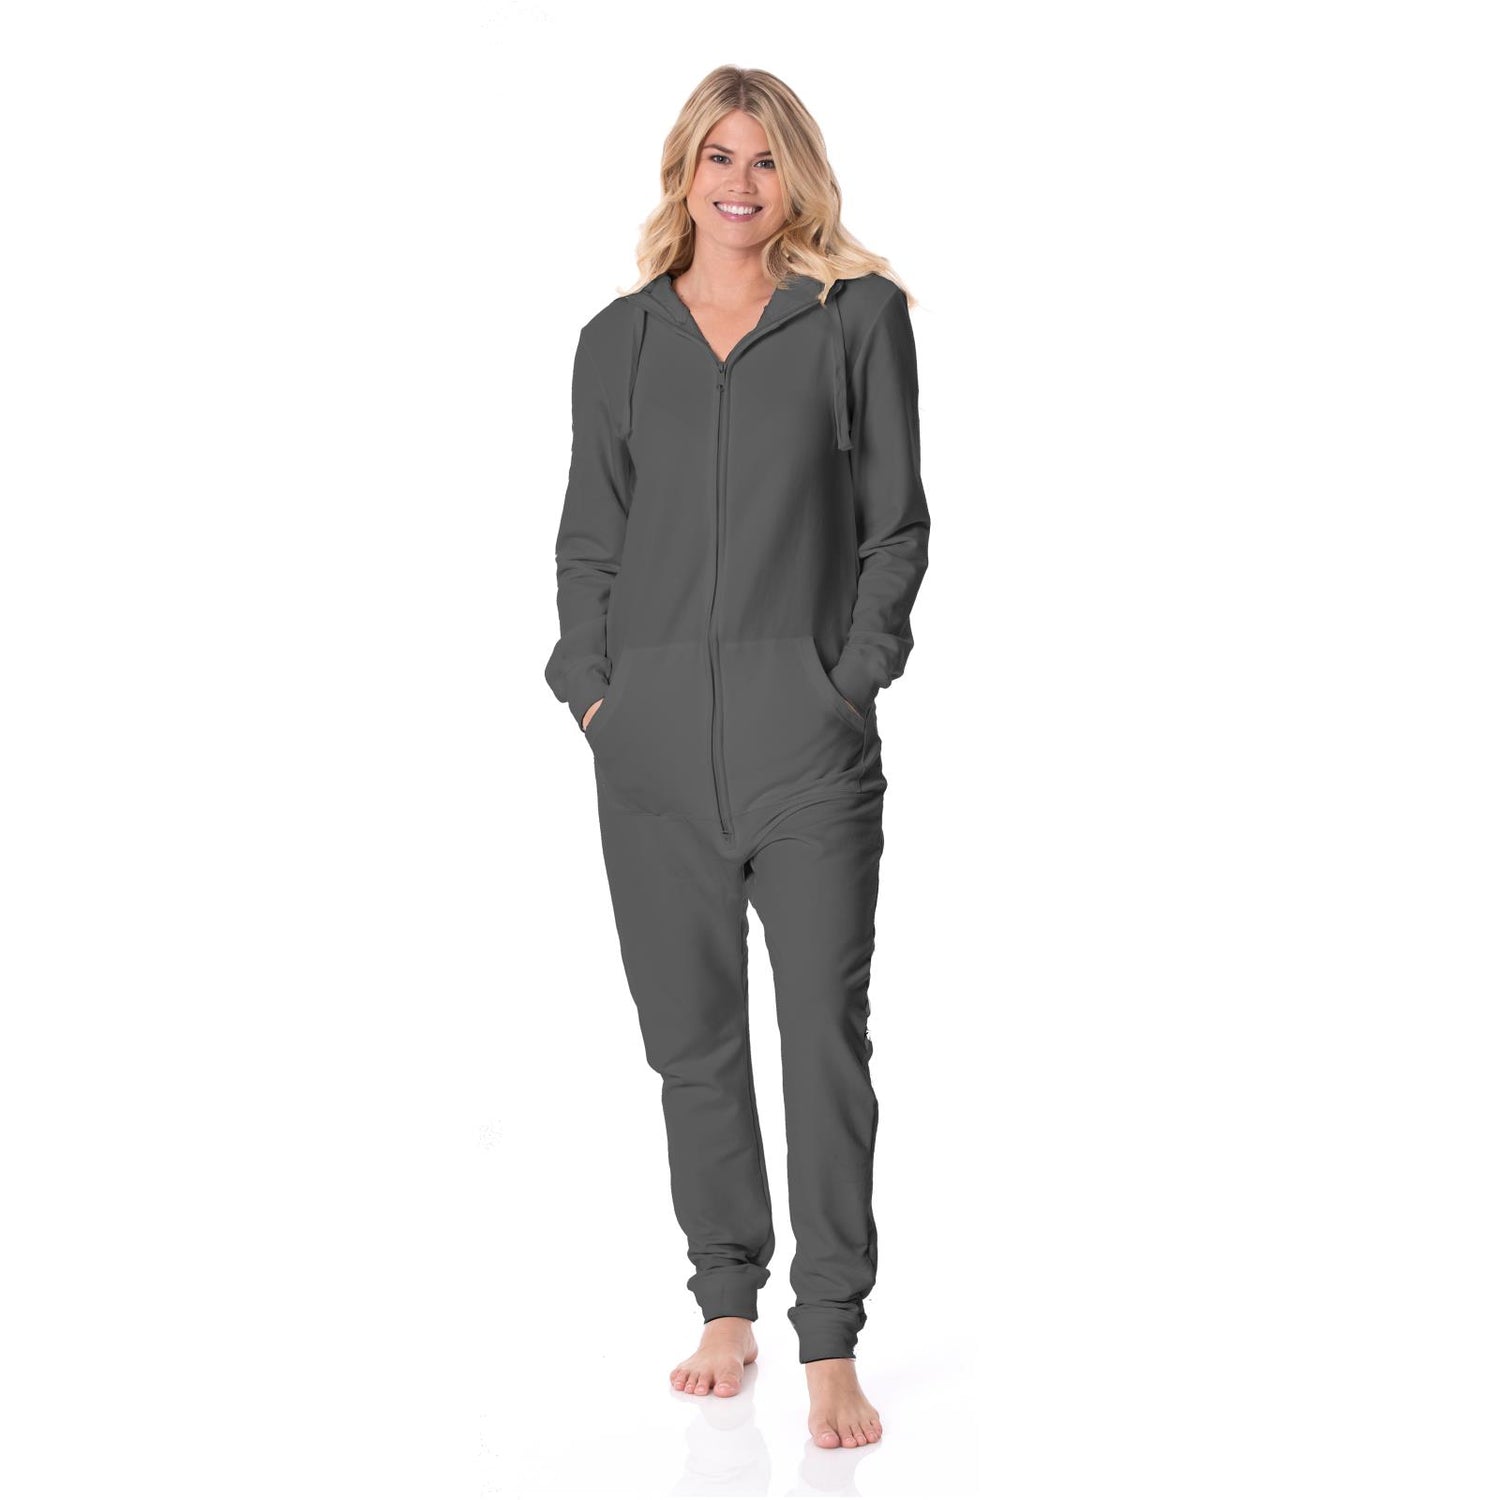 Adult Fleece Jumpsuit with Hood in Pewter